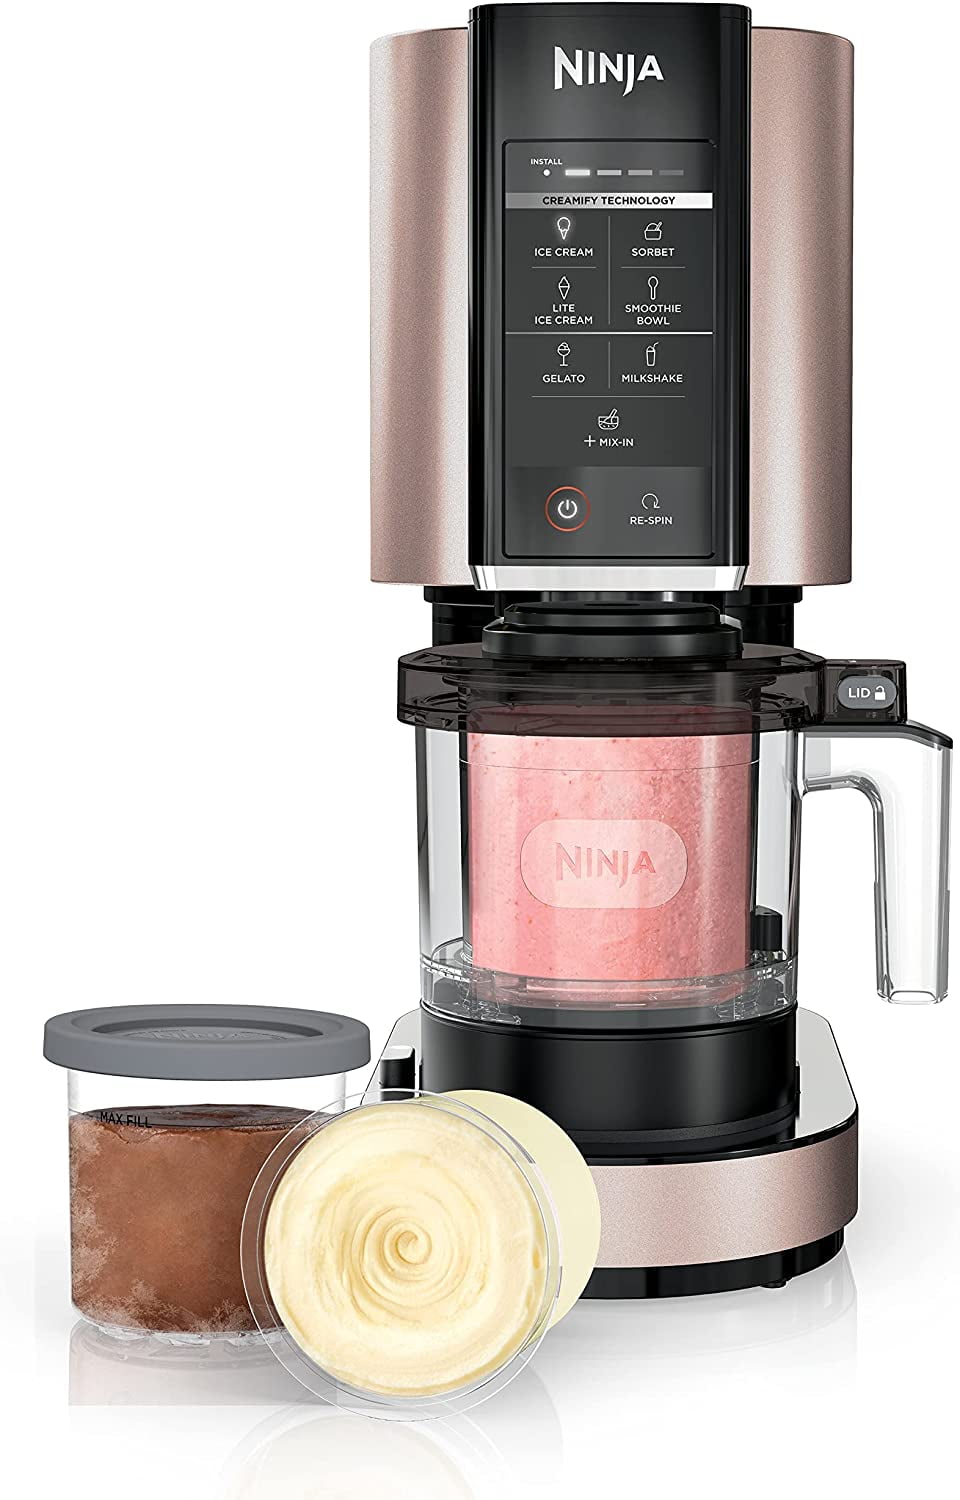 COMFEE' Juicer Extractor/Ice Cream Maker. 3.4, Champagne Gold 